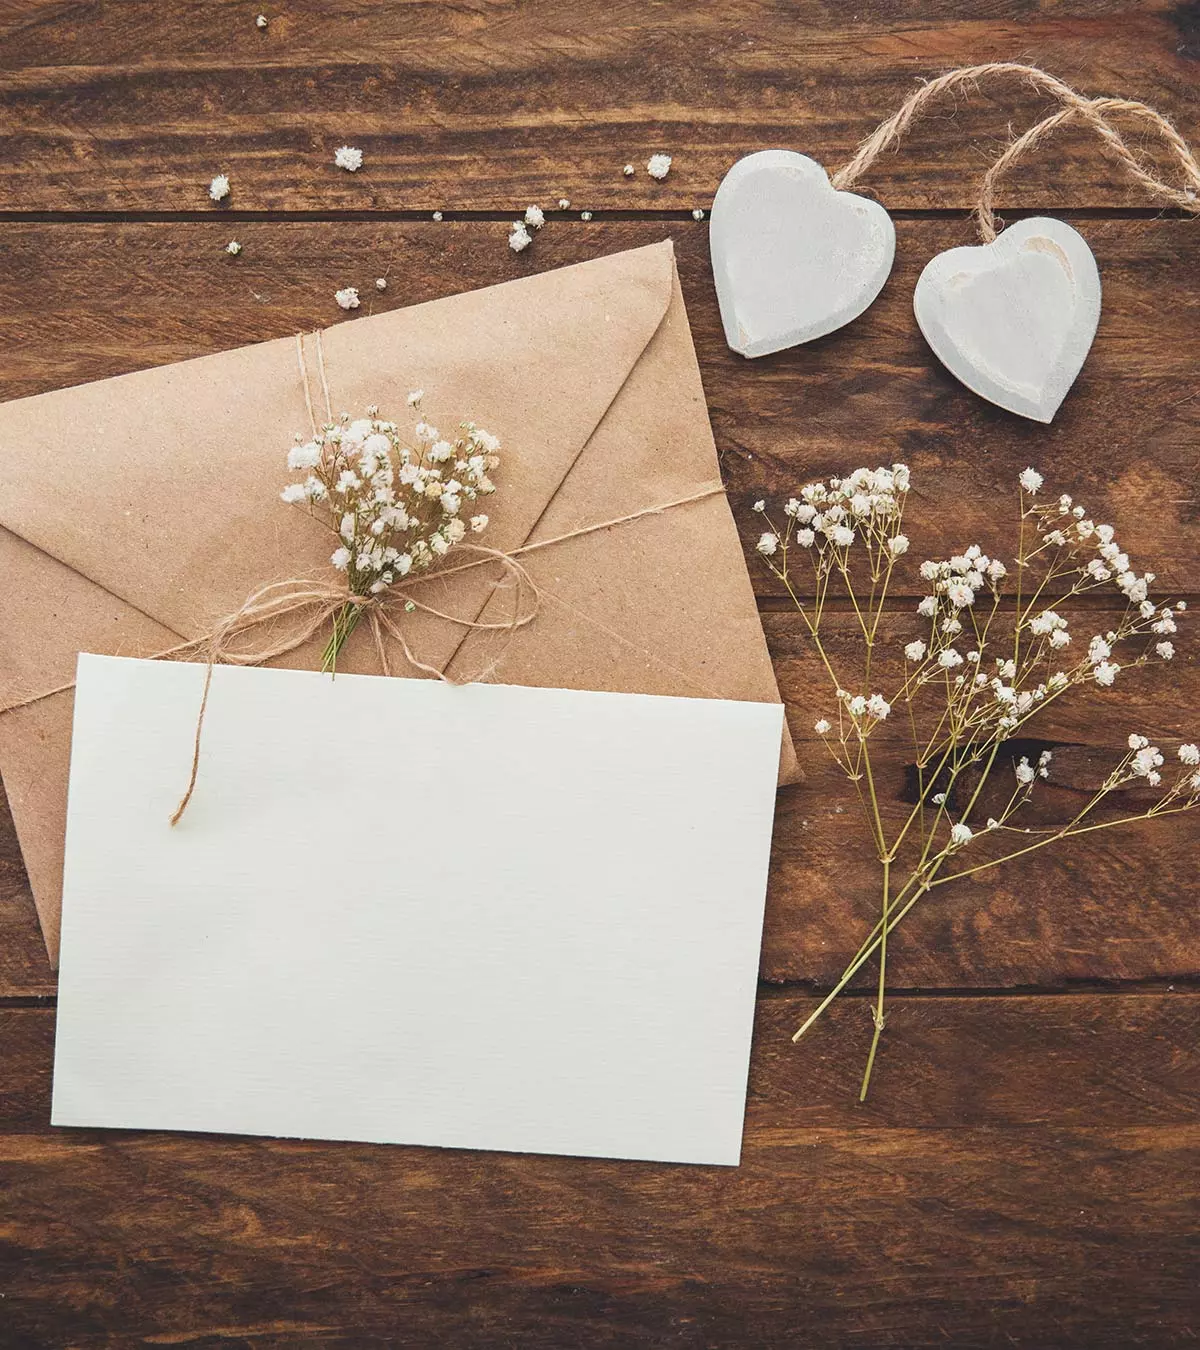 How To Write A Wedding Letter To Your Partner: 10 Simple Tips